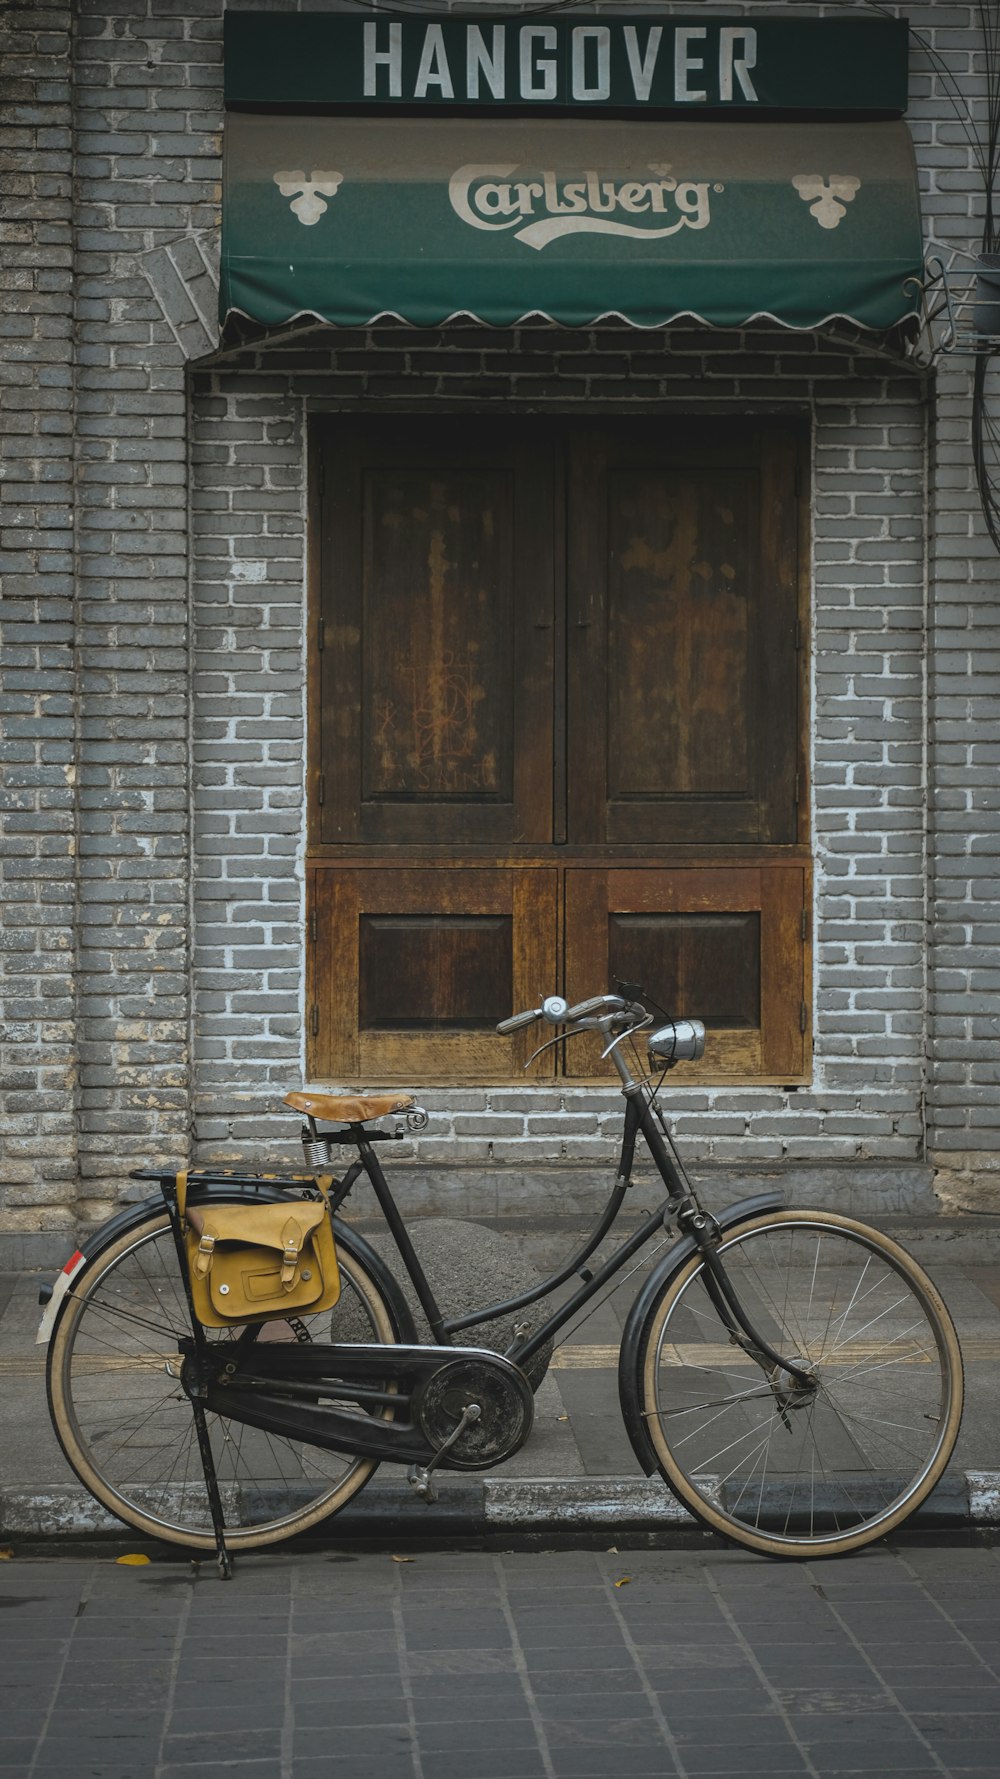 a bicycle parked in front of a brick building